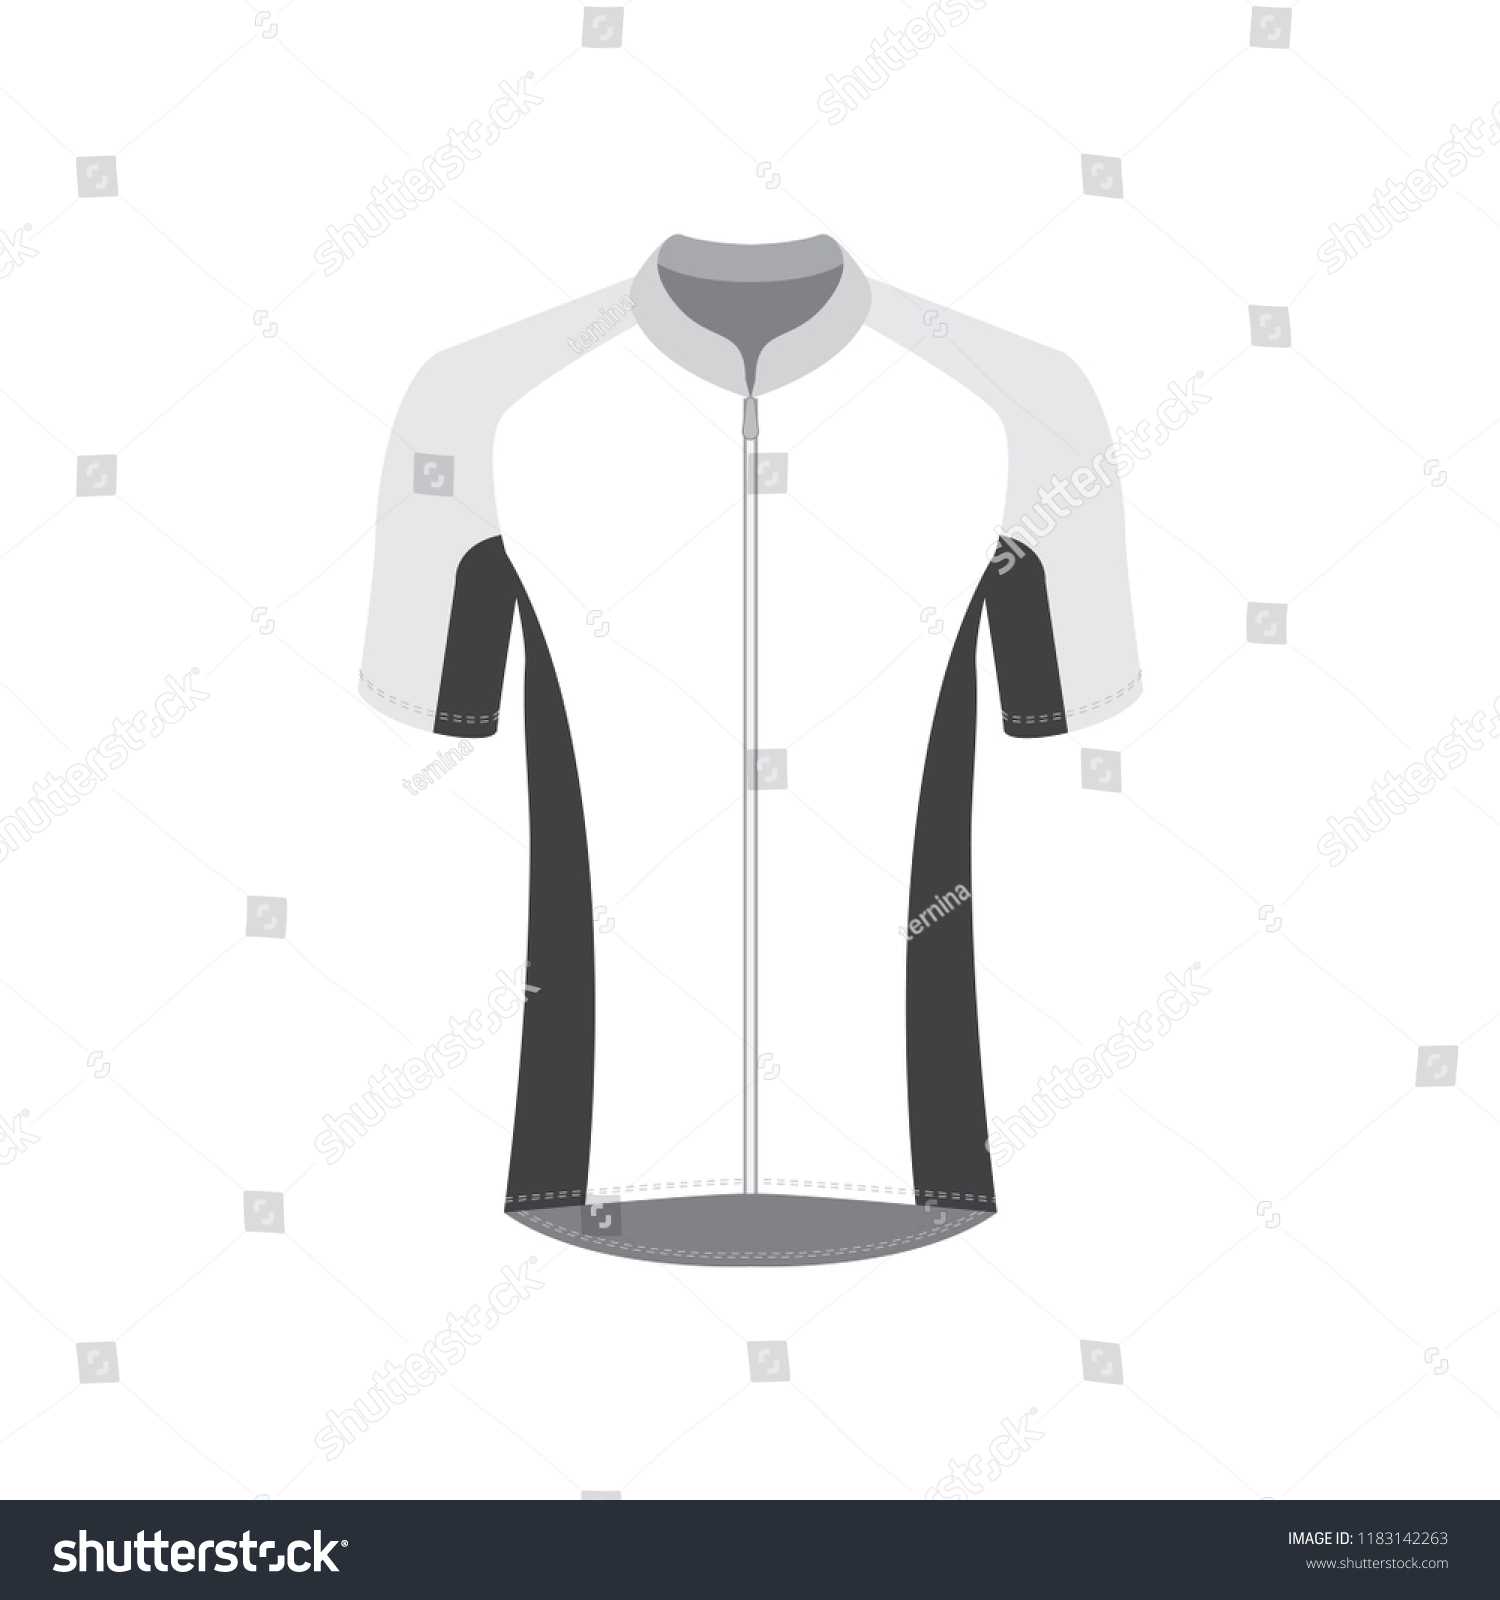 Royalty Free Bike Jersey Mockup Stock Images, Photos With Regard To Blank Cycling Jersey Template